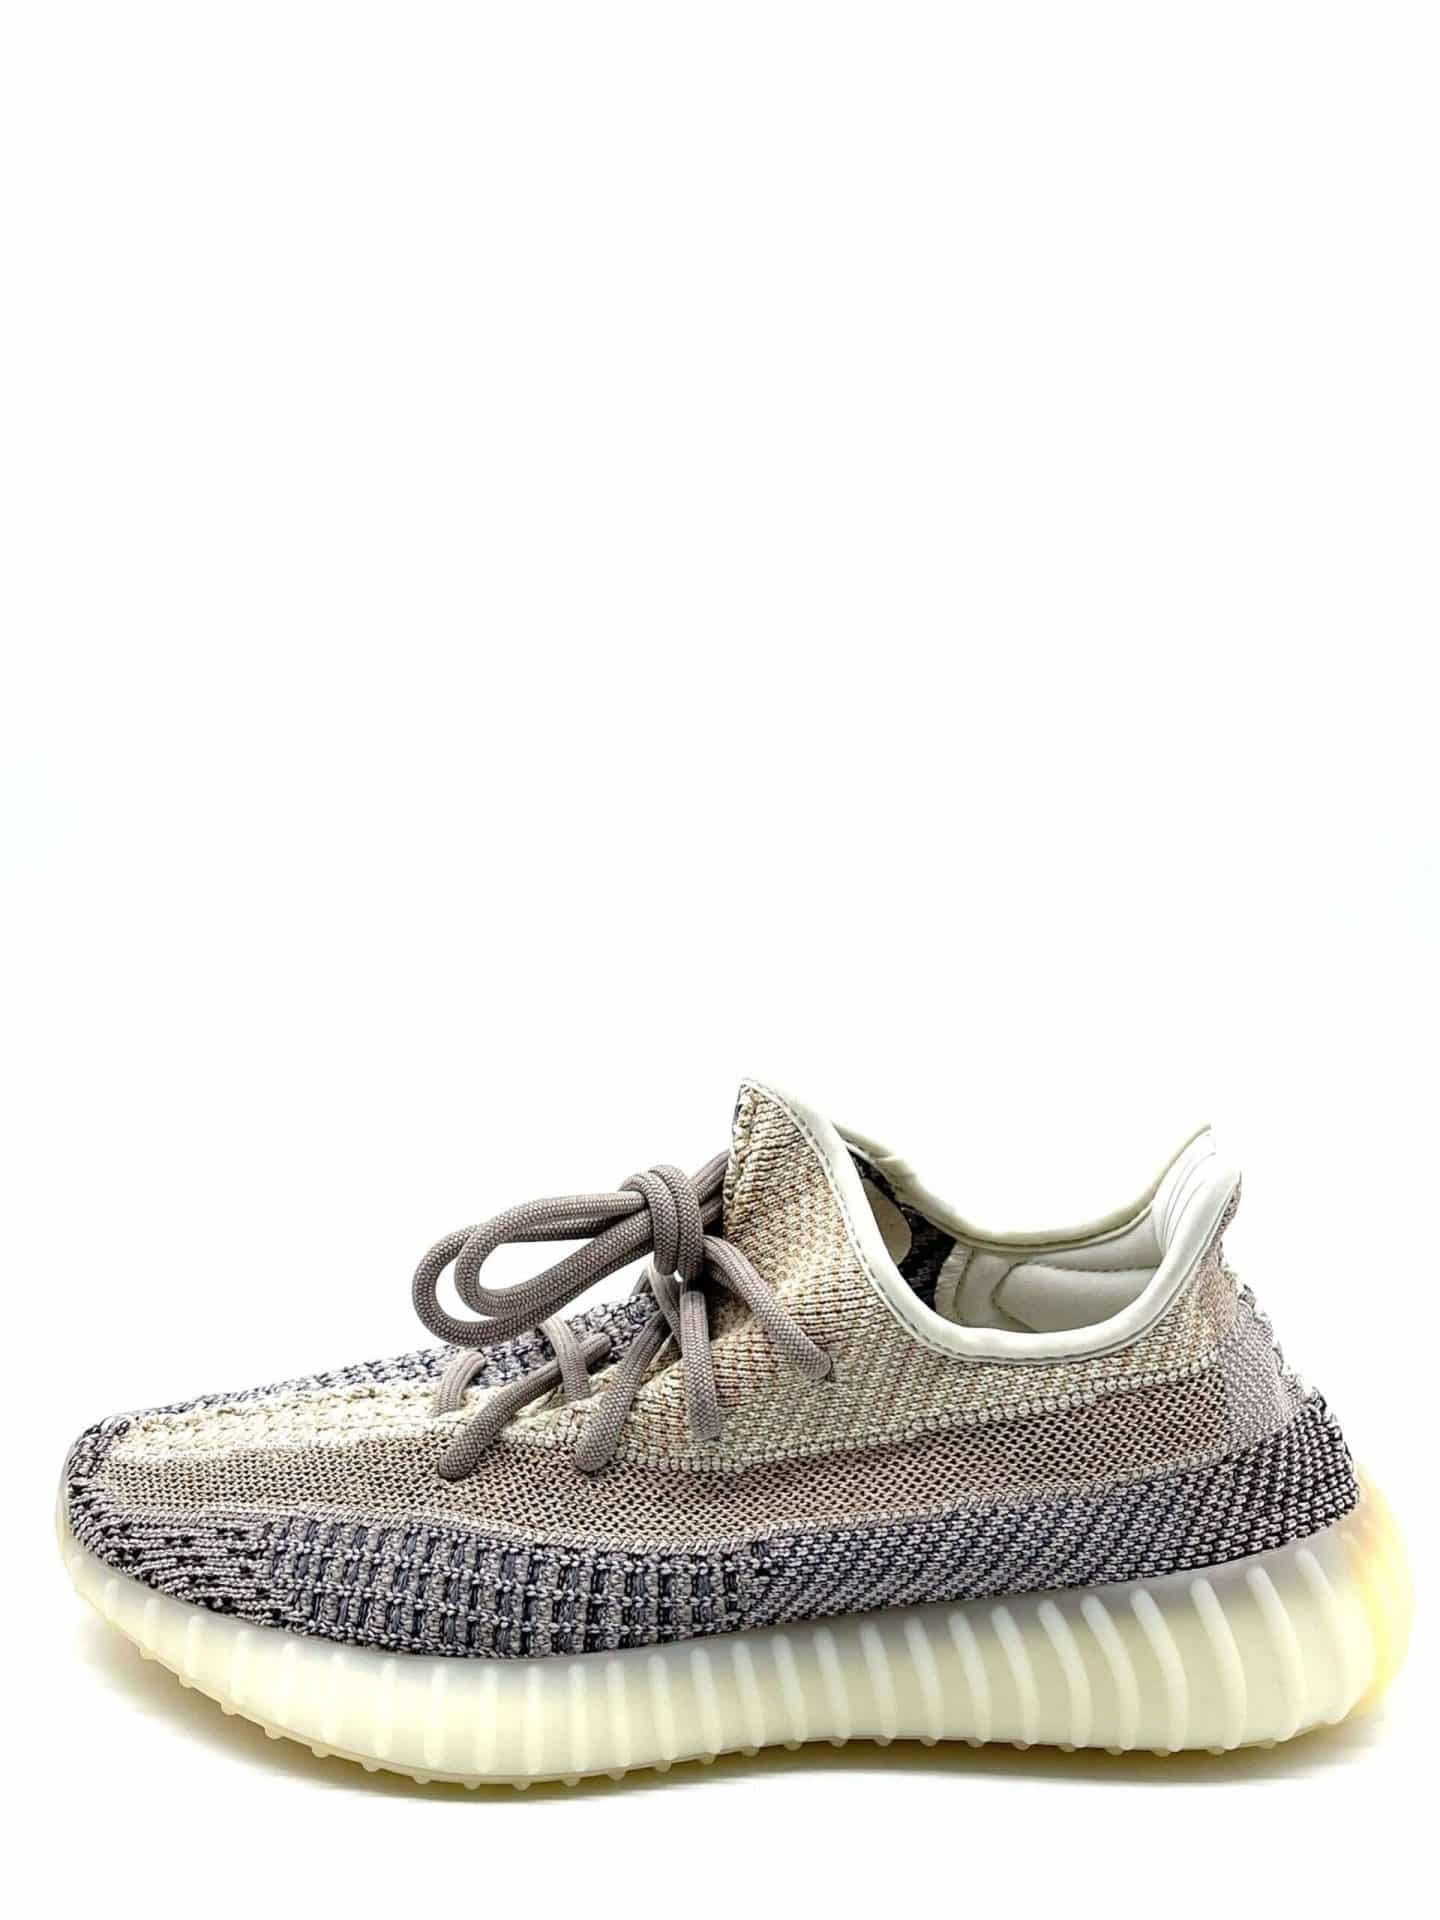 Cheap Ad Yeezy 350V2 Zebrareal Boost Basf Cp9654